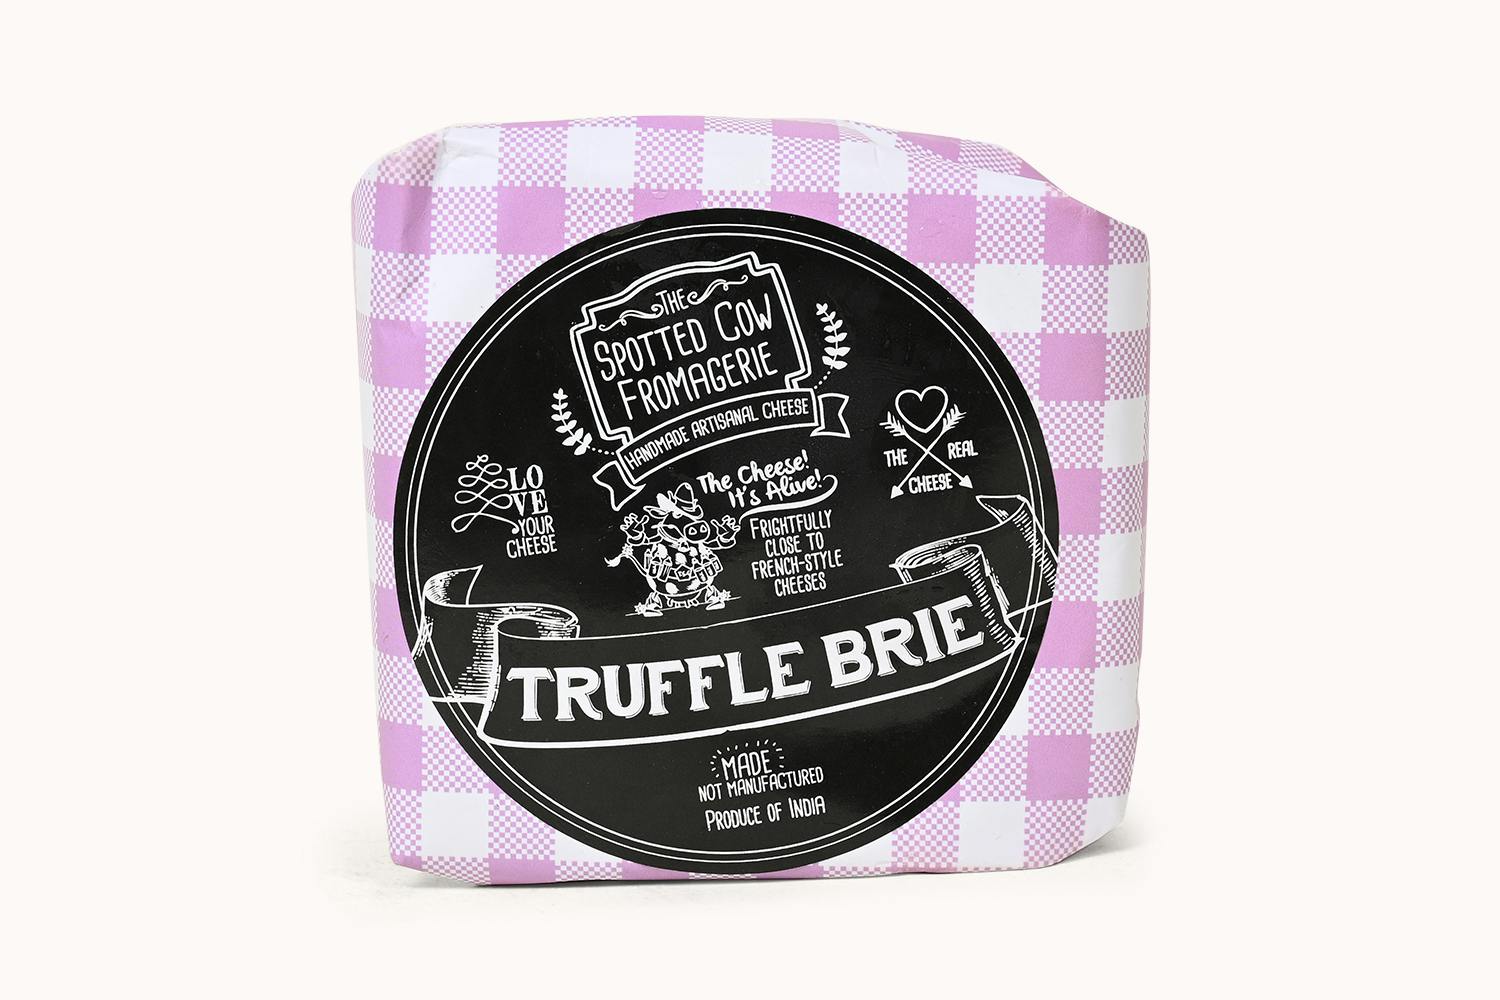 Spotted Cow Fromagerie Black Truffle Brie